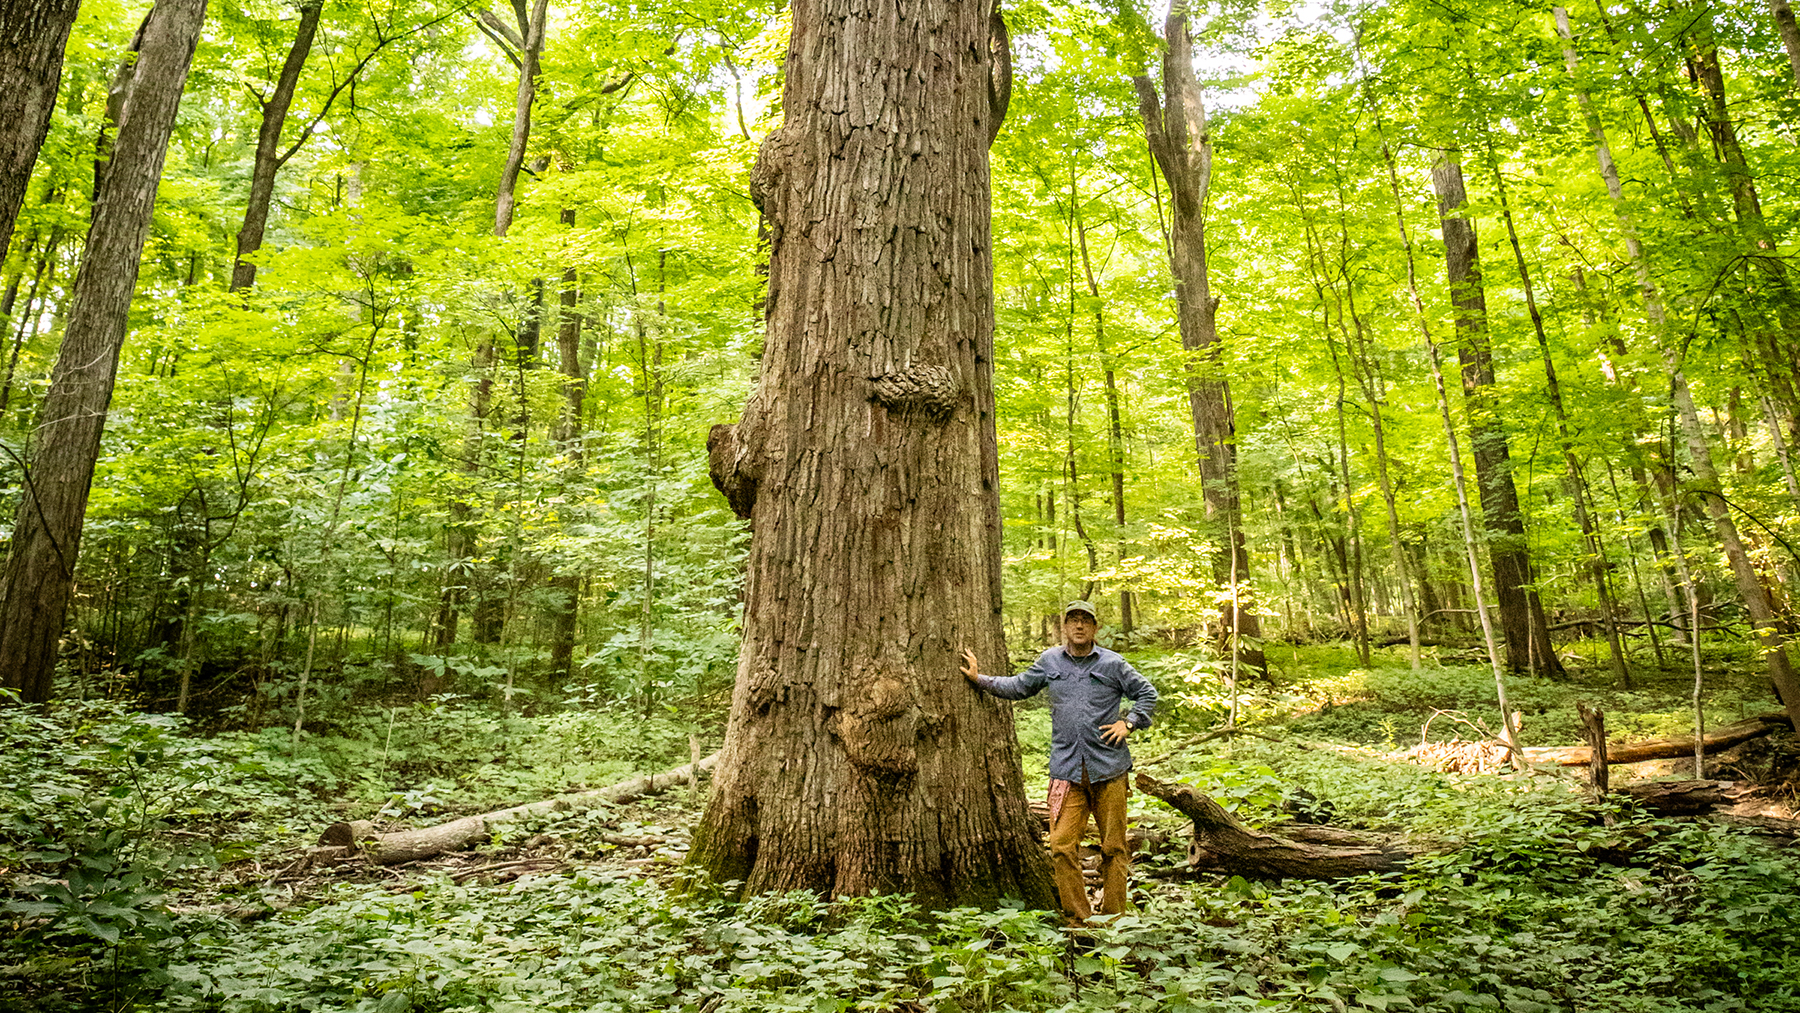 This bur oak tree in Brownfield Woods dates to the 1600s. Photo by Brian Stauffer